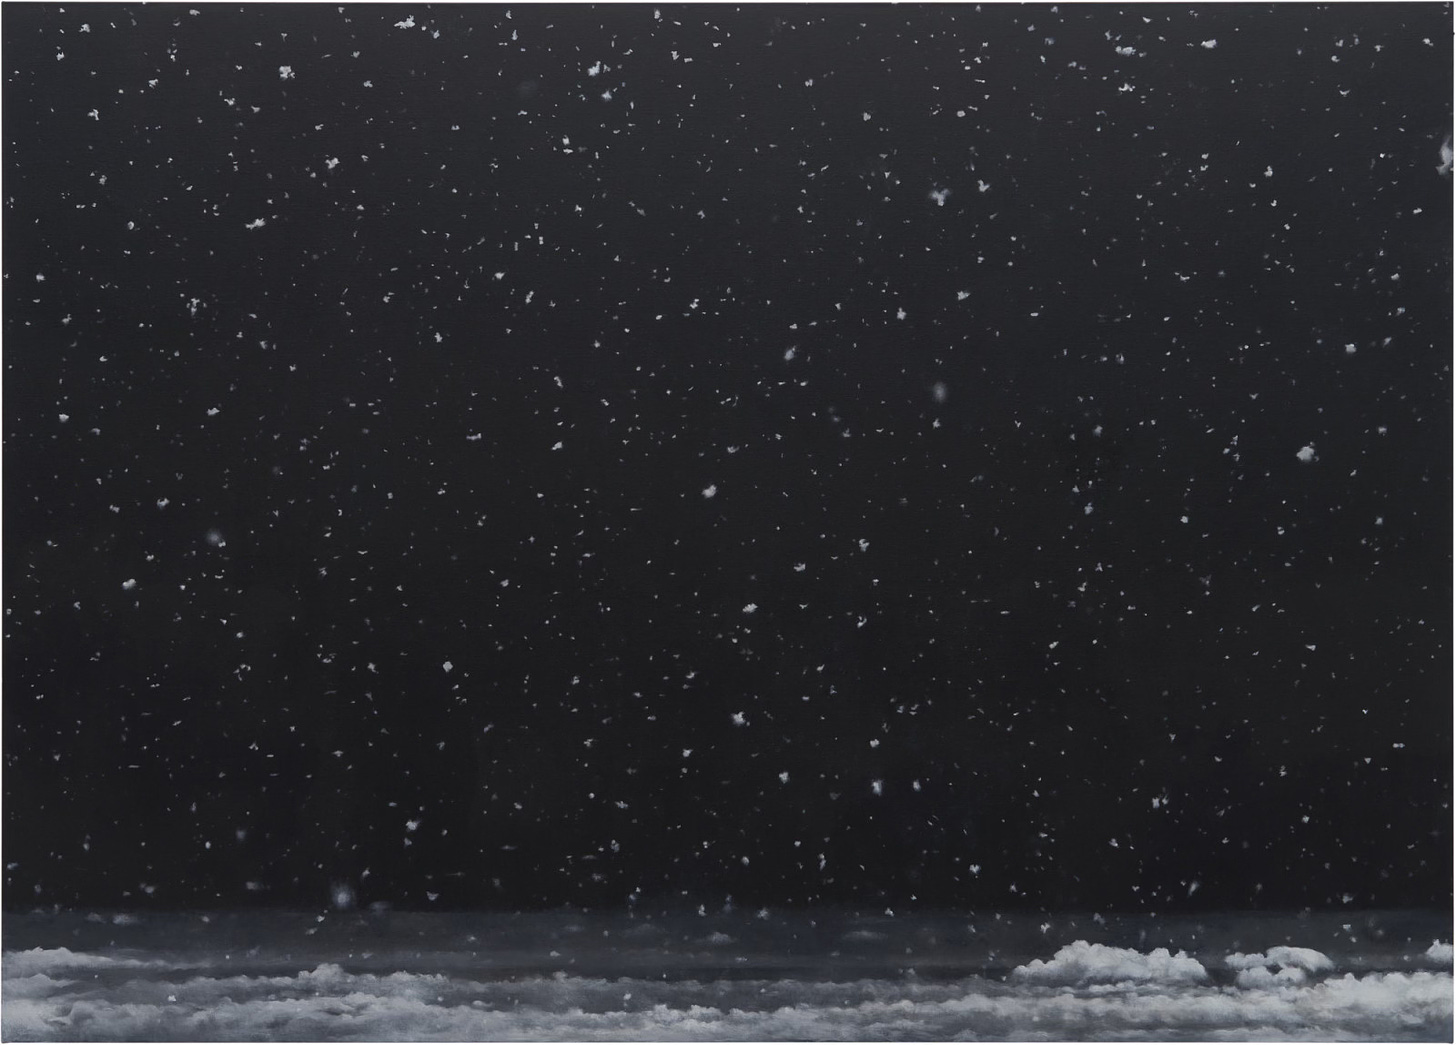 The painting Snowfall #3 by Vija Celmins. A field of black dotted all over with white specks. At the bottom of the painting are the white breakers of waves rolling up on a beach. 